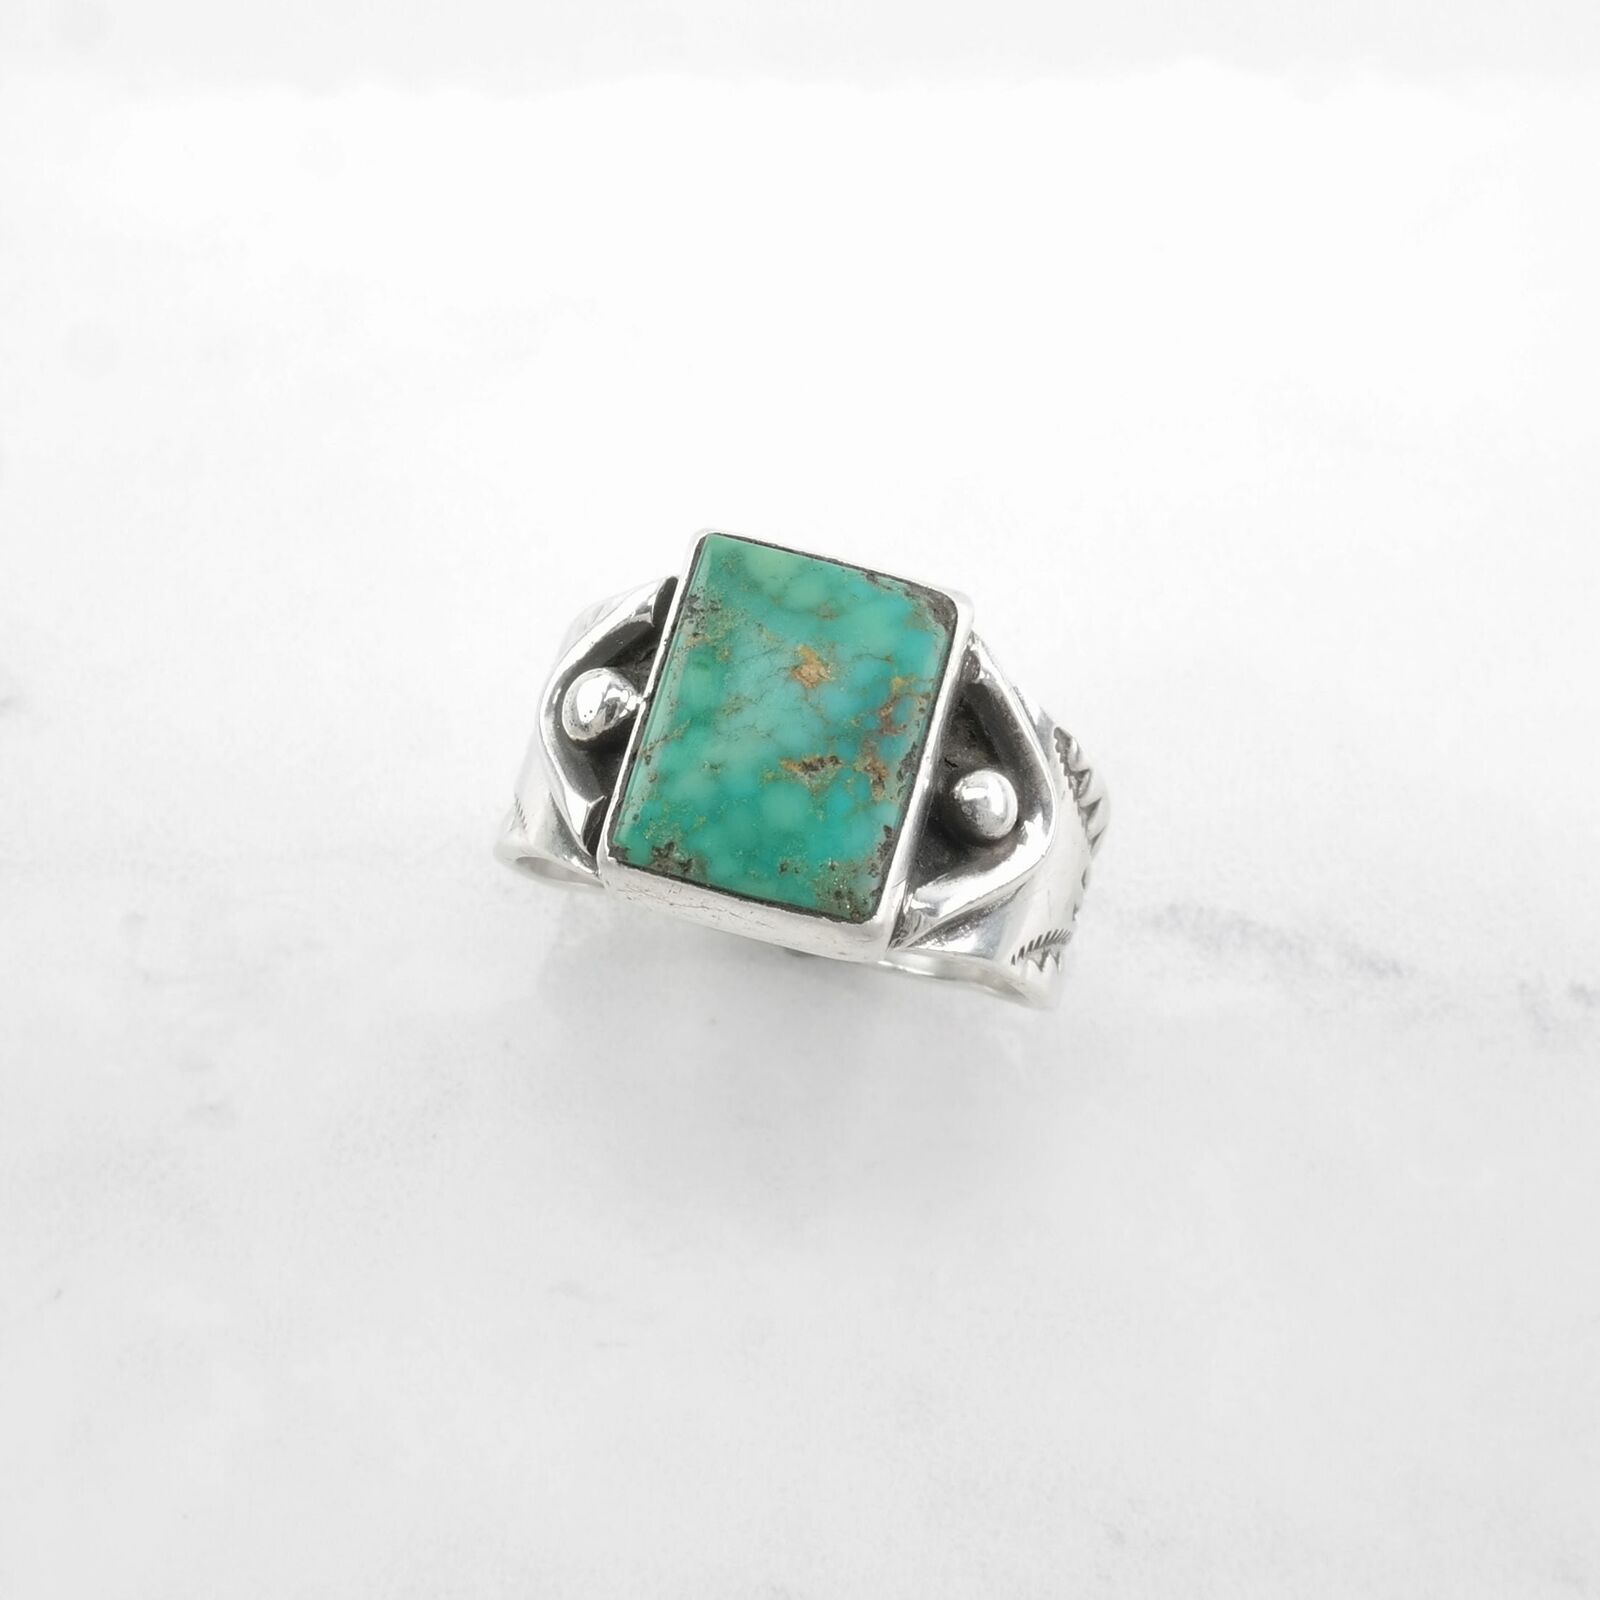 Vintage Navajo Sterling Silver Ring Turquoise, Stamped Green Size 10 1/2